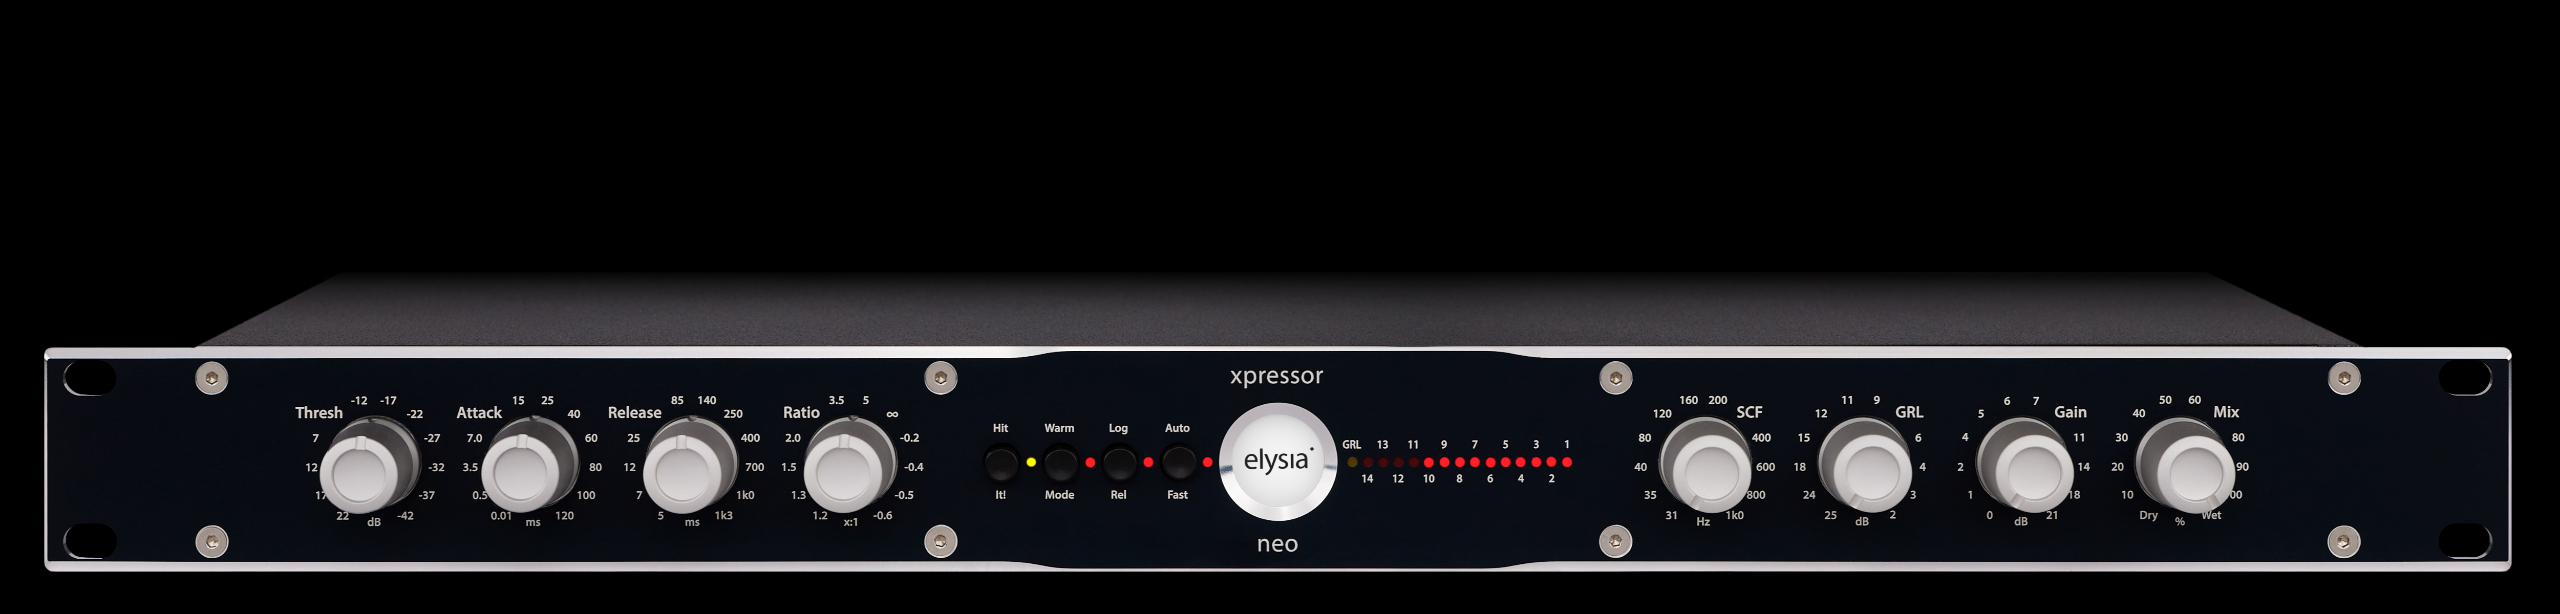 picture of the elysia xpressor|neo 19" rack front with all controls and buttons.